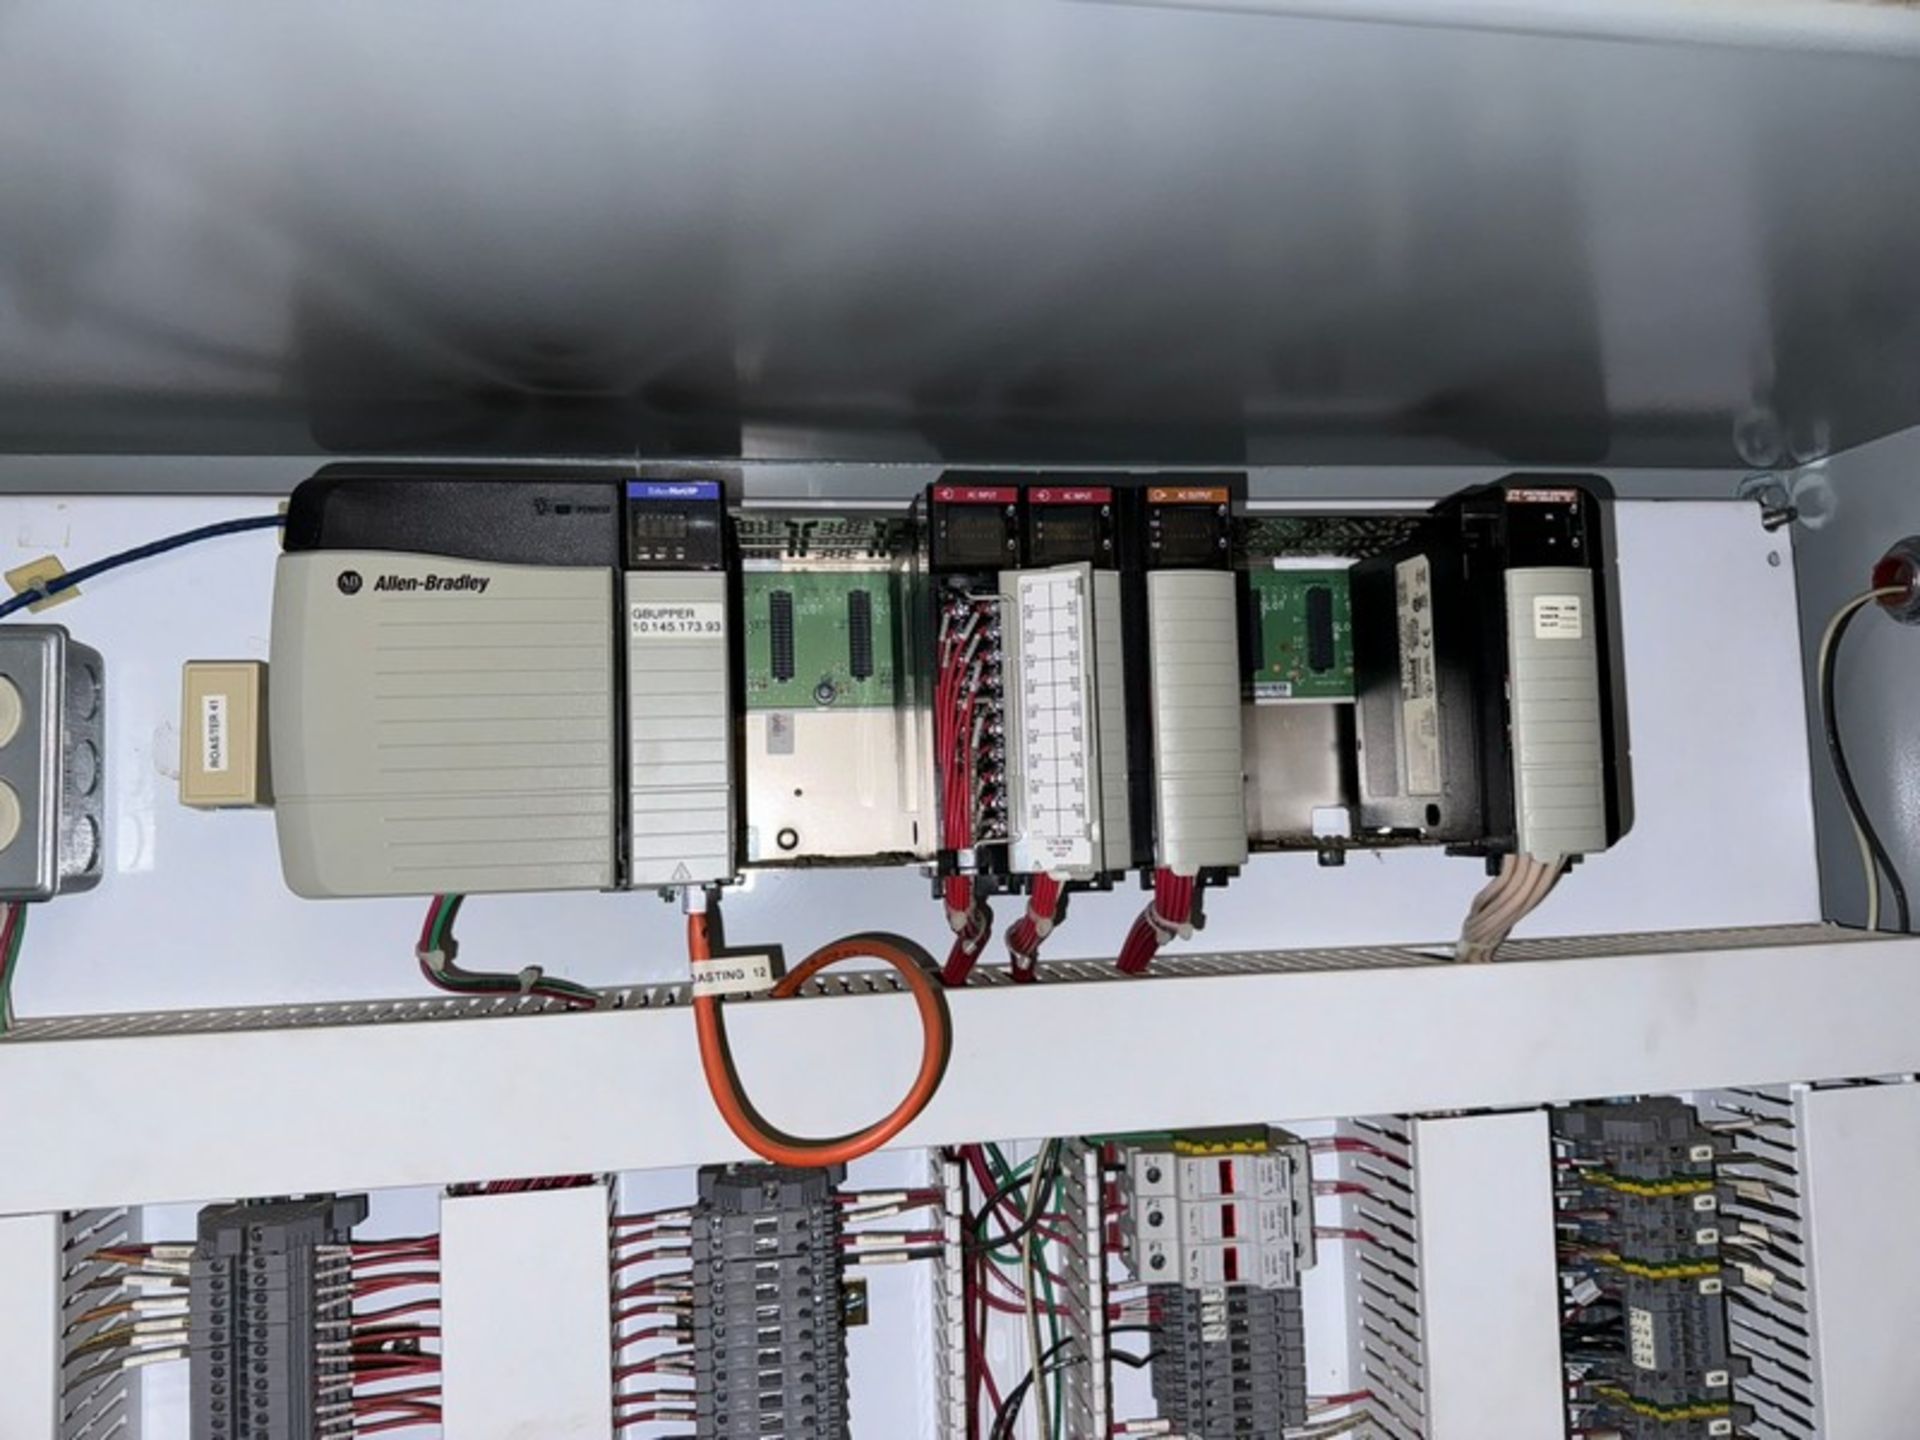 Control Panel, with Allen-Bradley 11-Slot PLC, & Other Components (NOTE: PLC Missing Slots—See